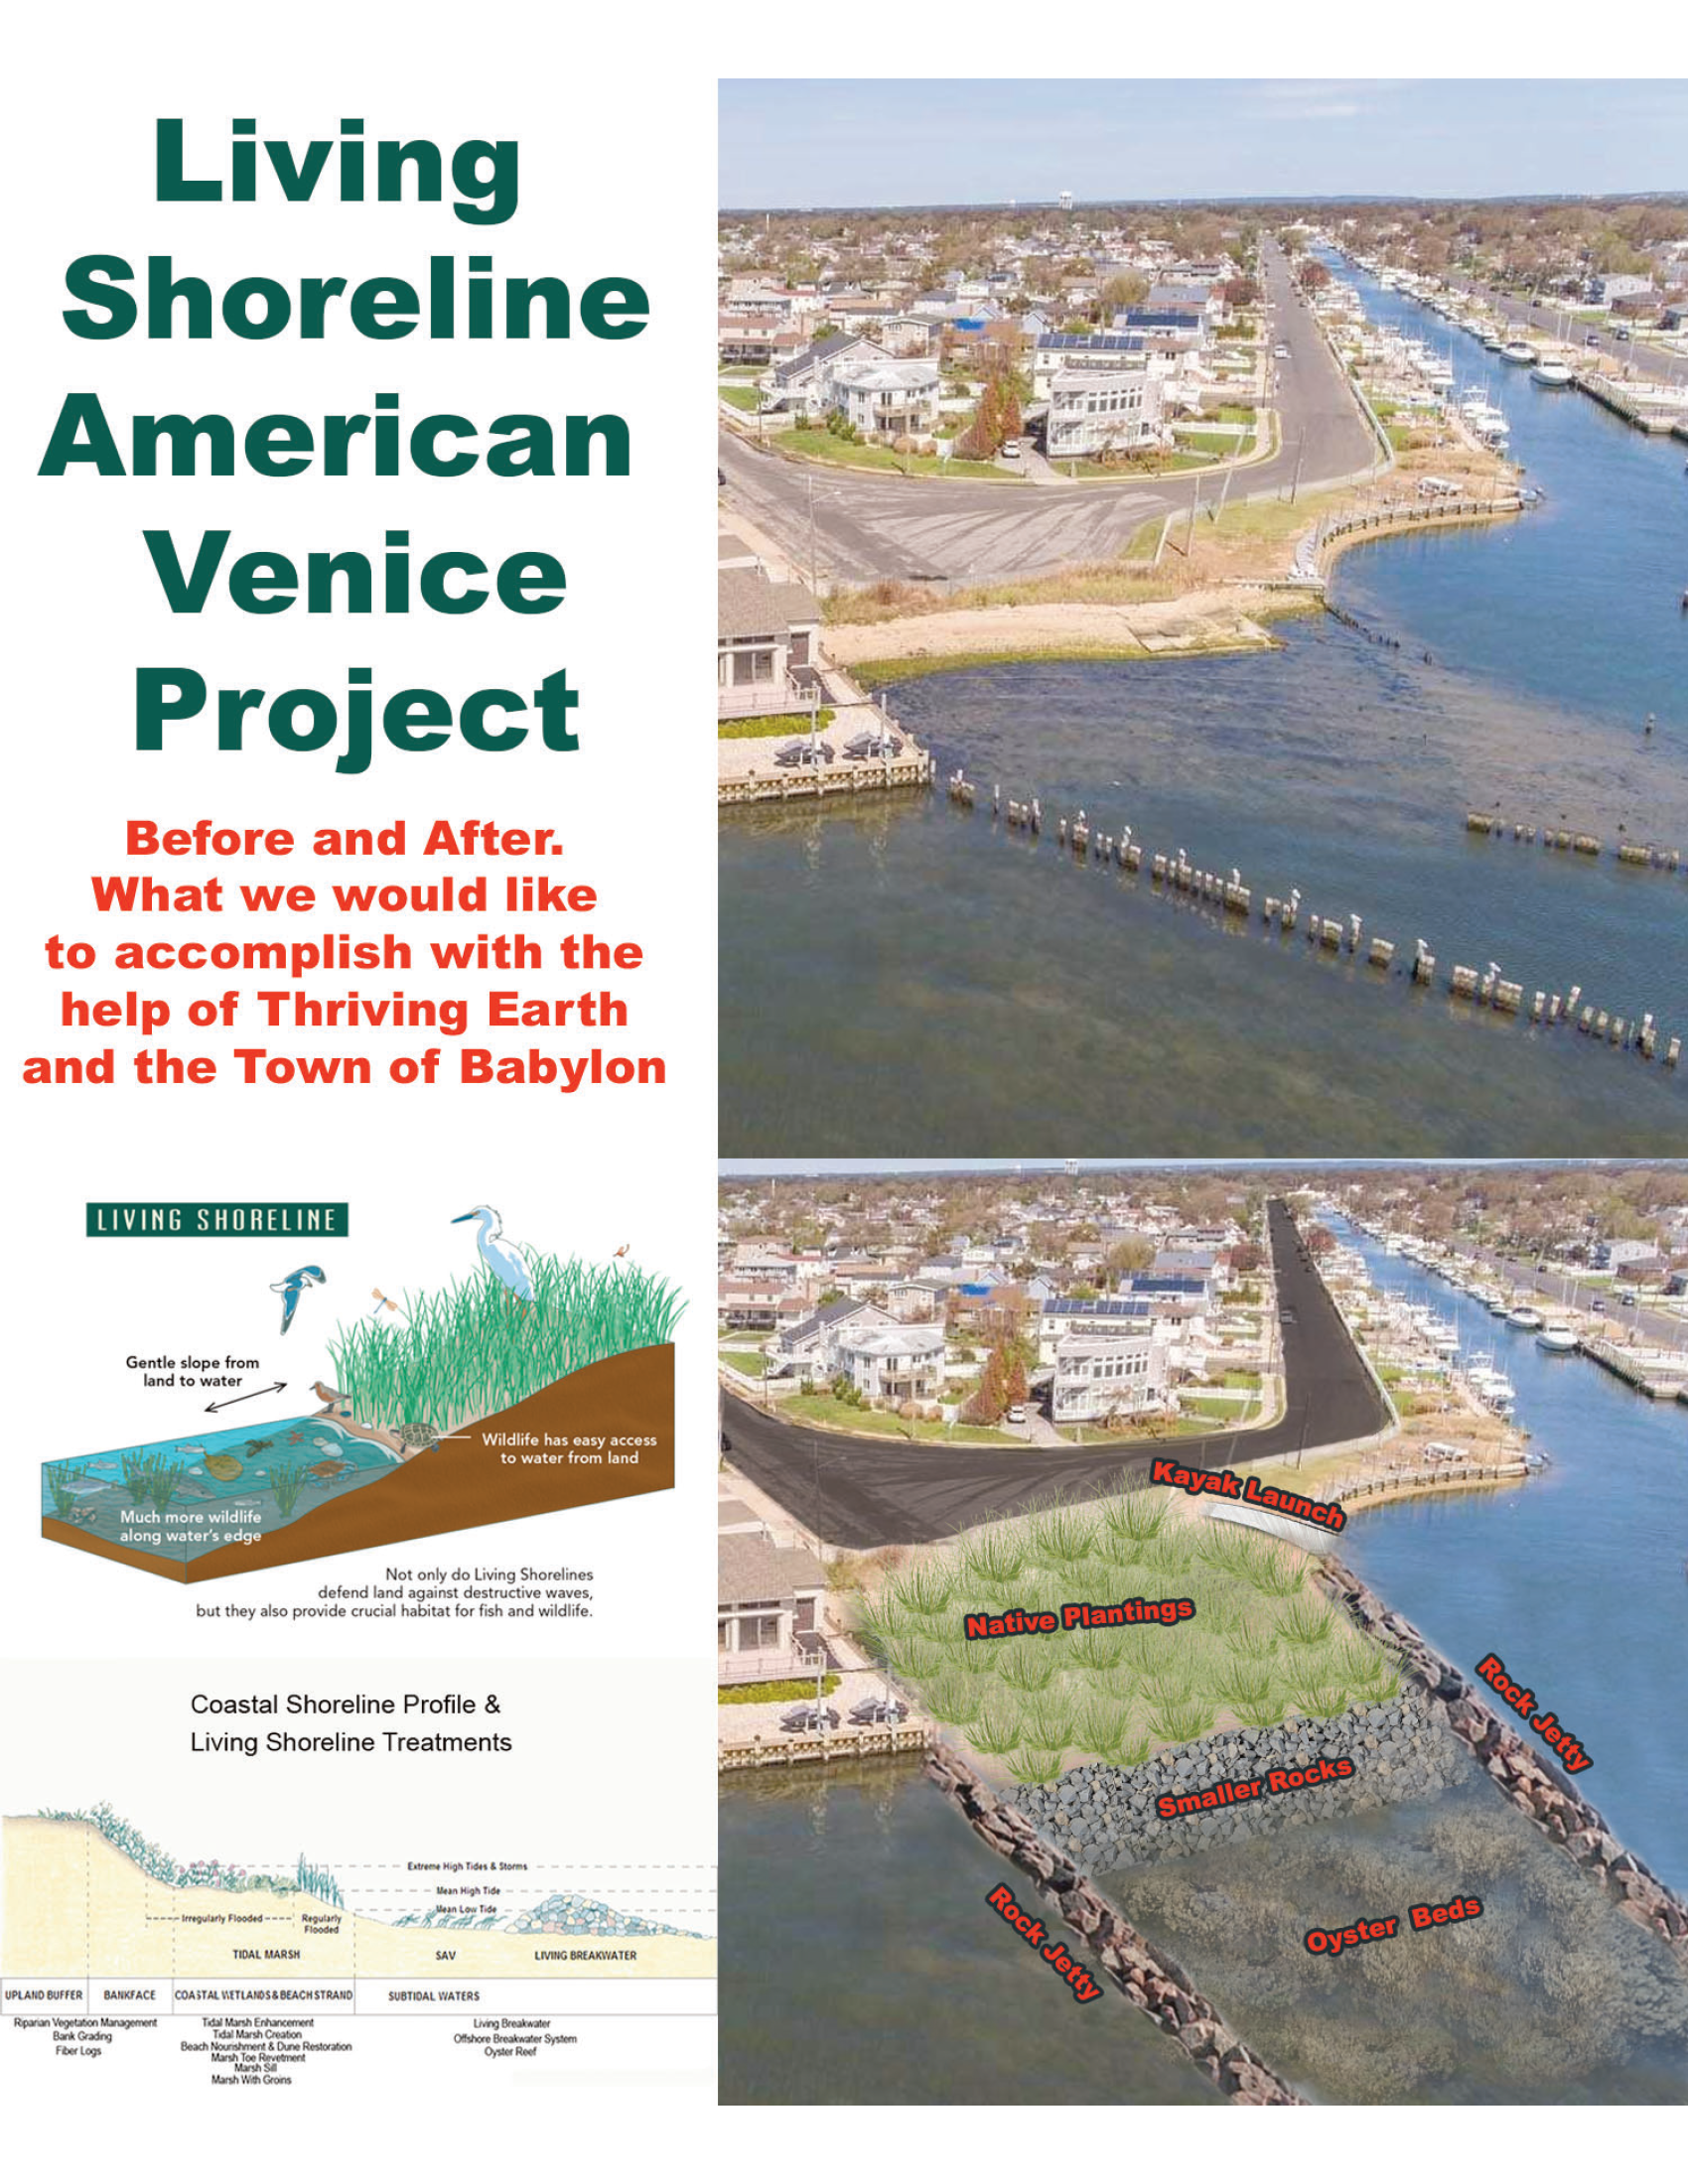 Featured image for the Designing a living shoreline to mitigate flooding and increase community resilience project.